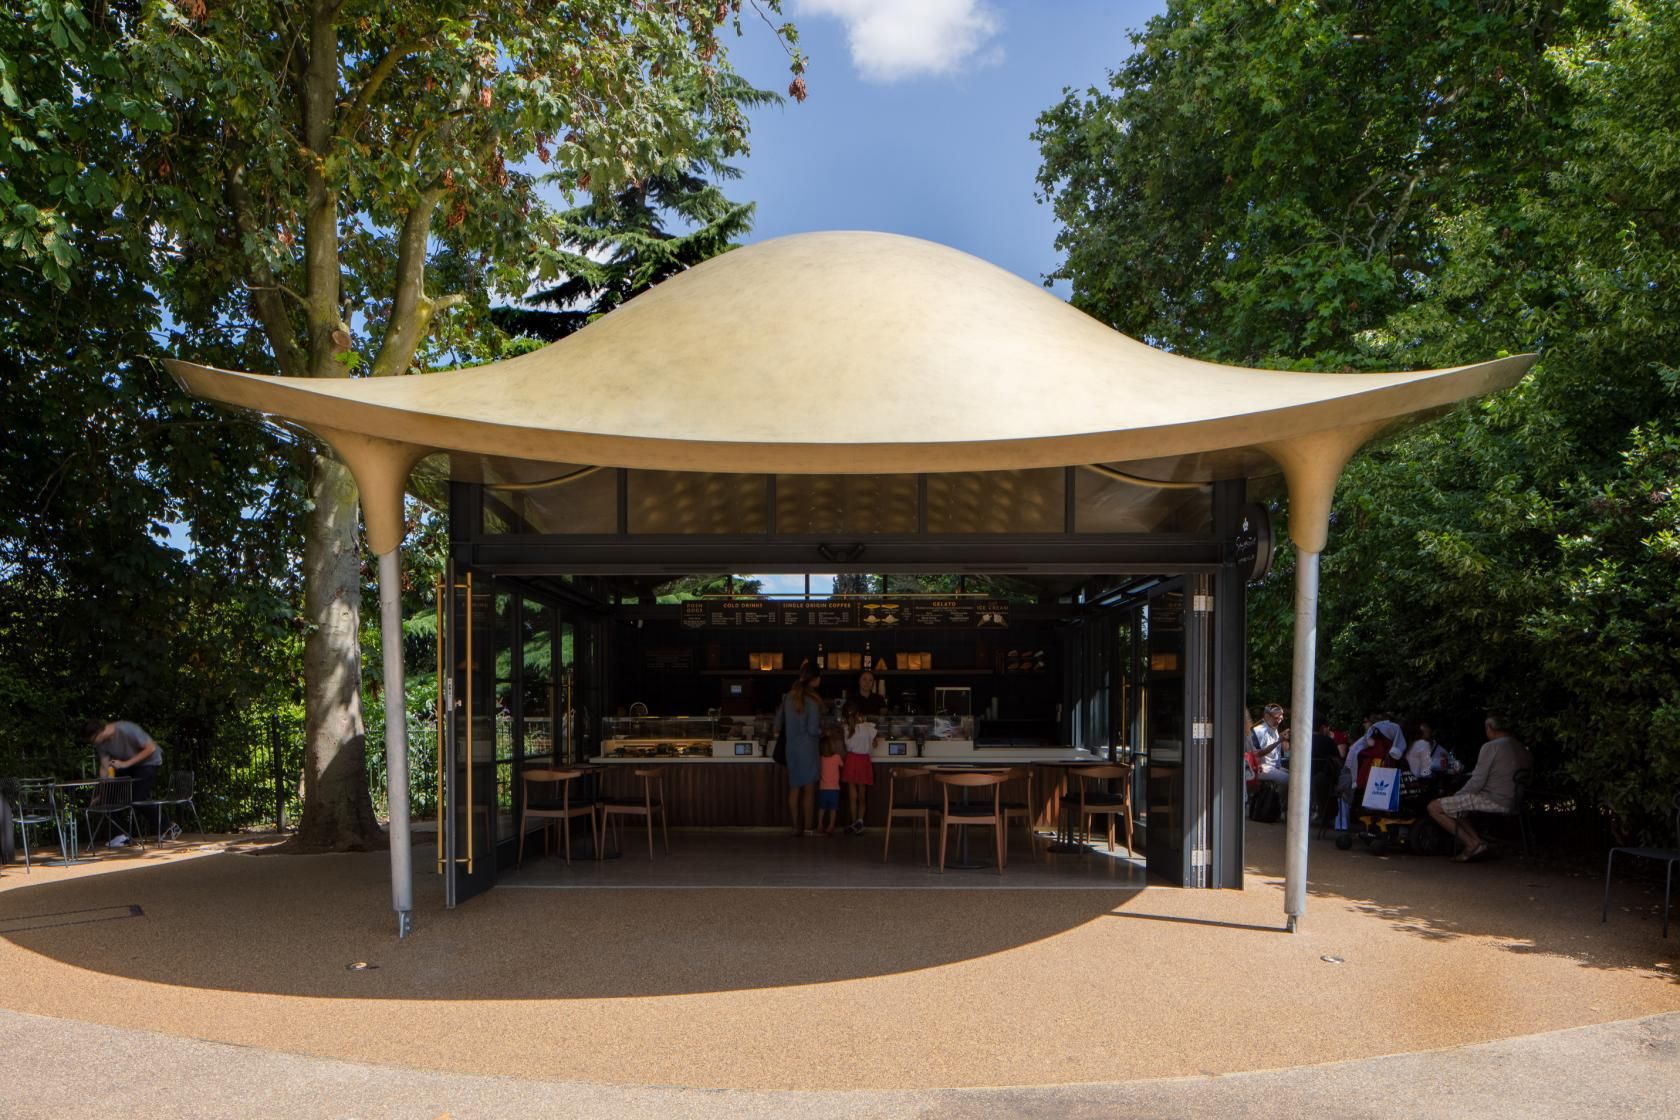 A sculptural coffee house by Mizzi Studio lands in London’s Hyde Park